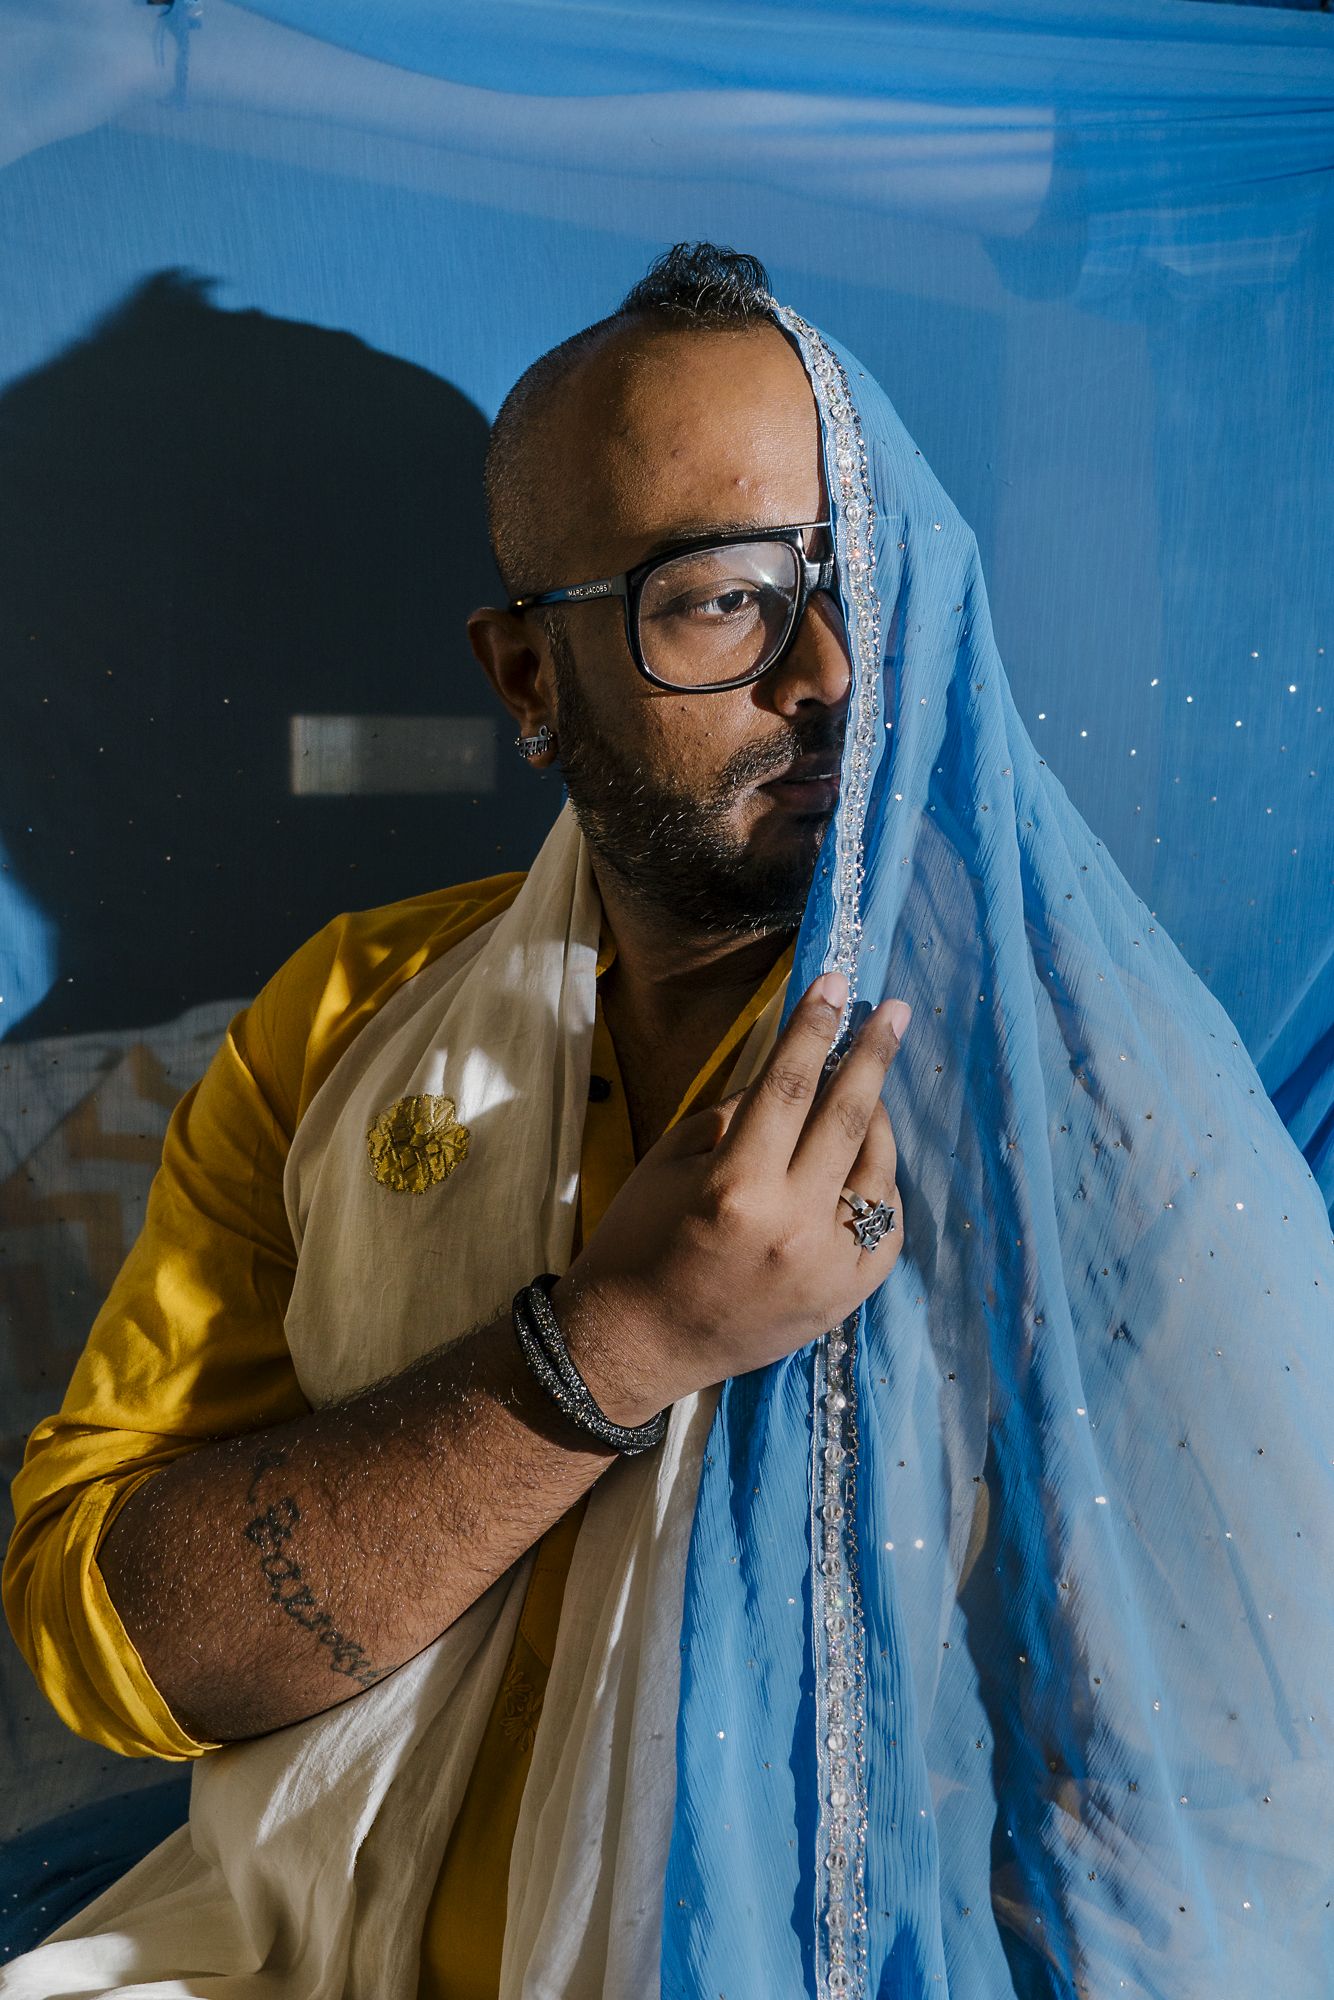 Faraz Arif Ansari, an out gay man and director of “Sisak,” an LGBTQ short film, poses for a portrait in his hotel room in New Delhi. The film tracks a brief encounter between two men who meet each other on Mumbai’s local trains. Image by Jake Naughton and Aarti Singh. India, 2017.